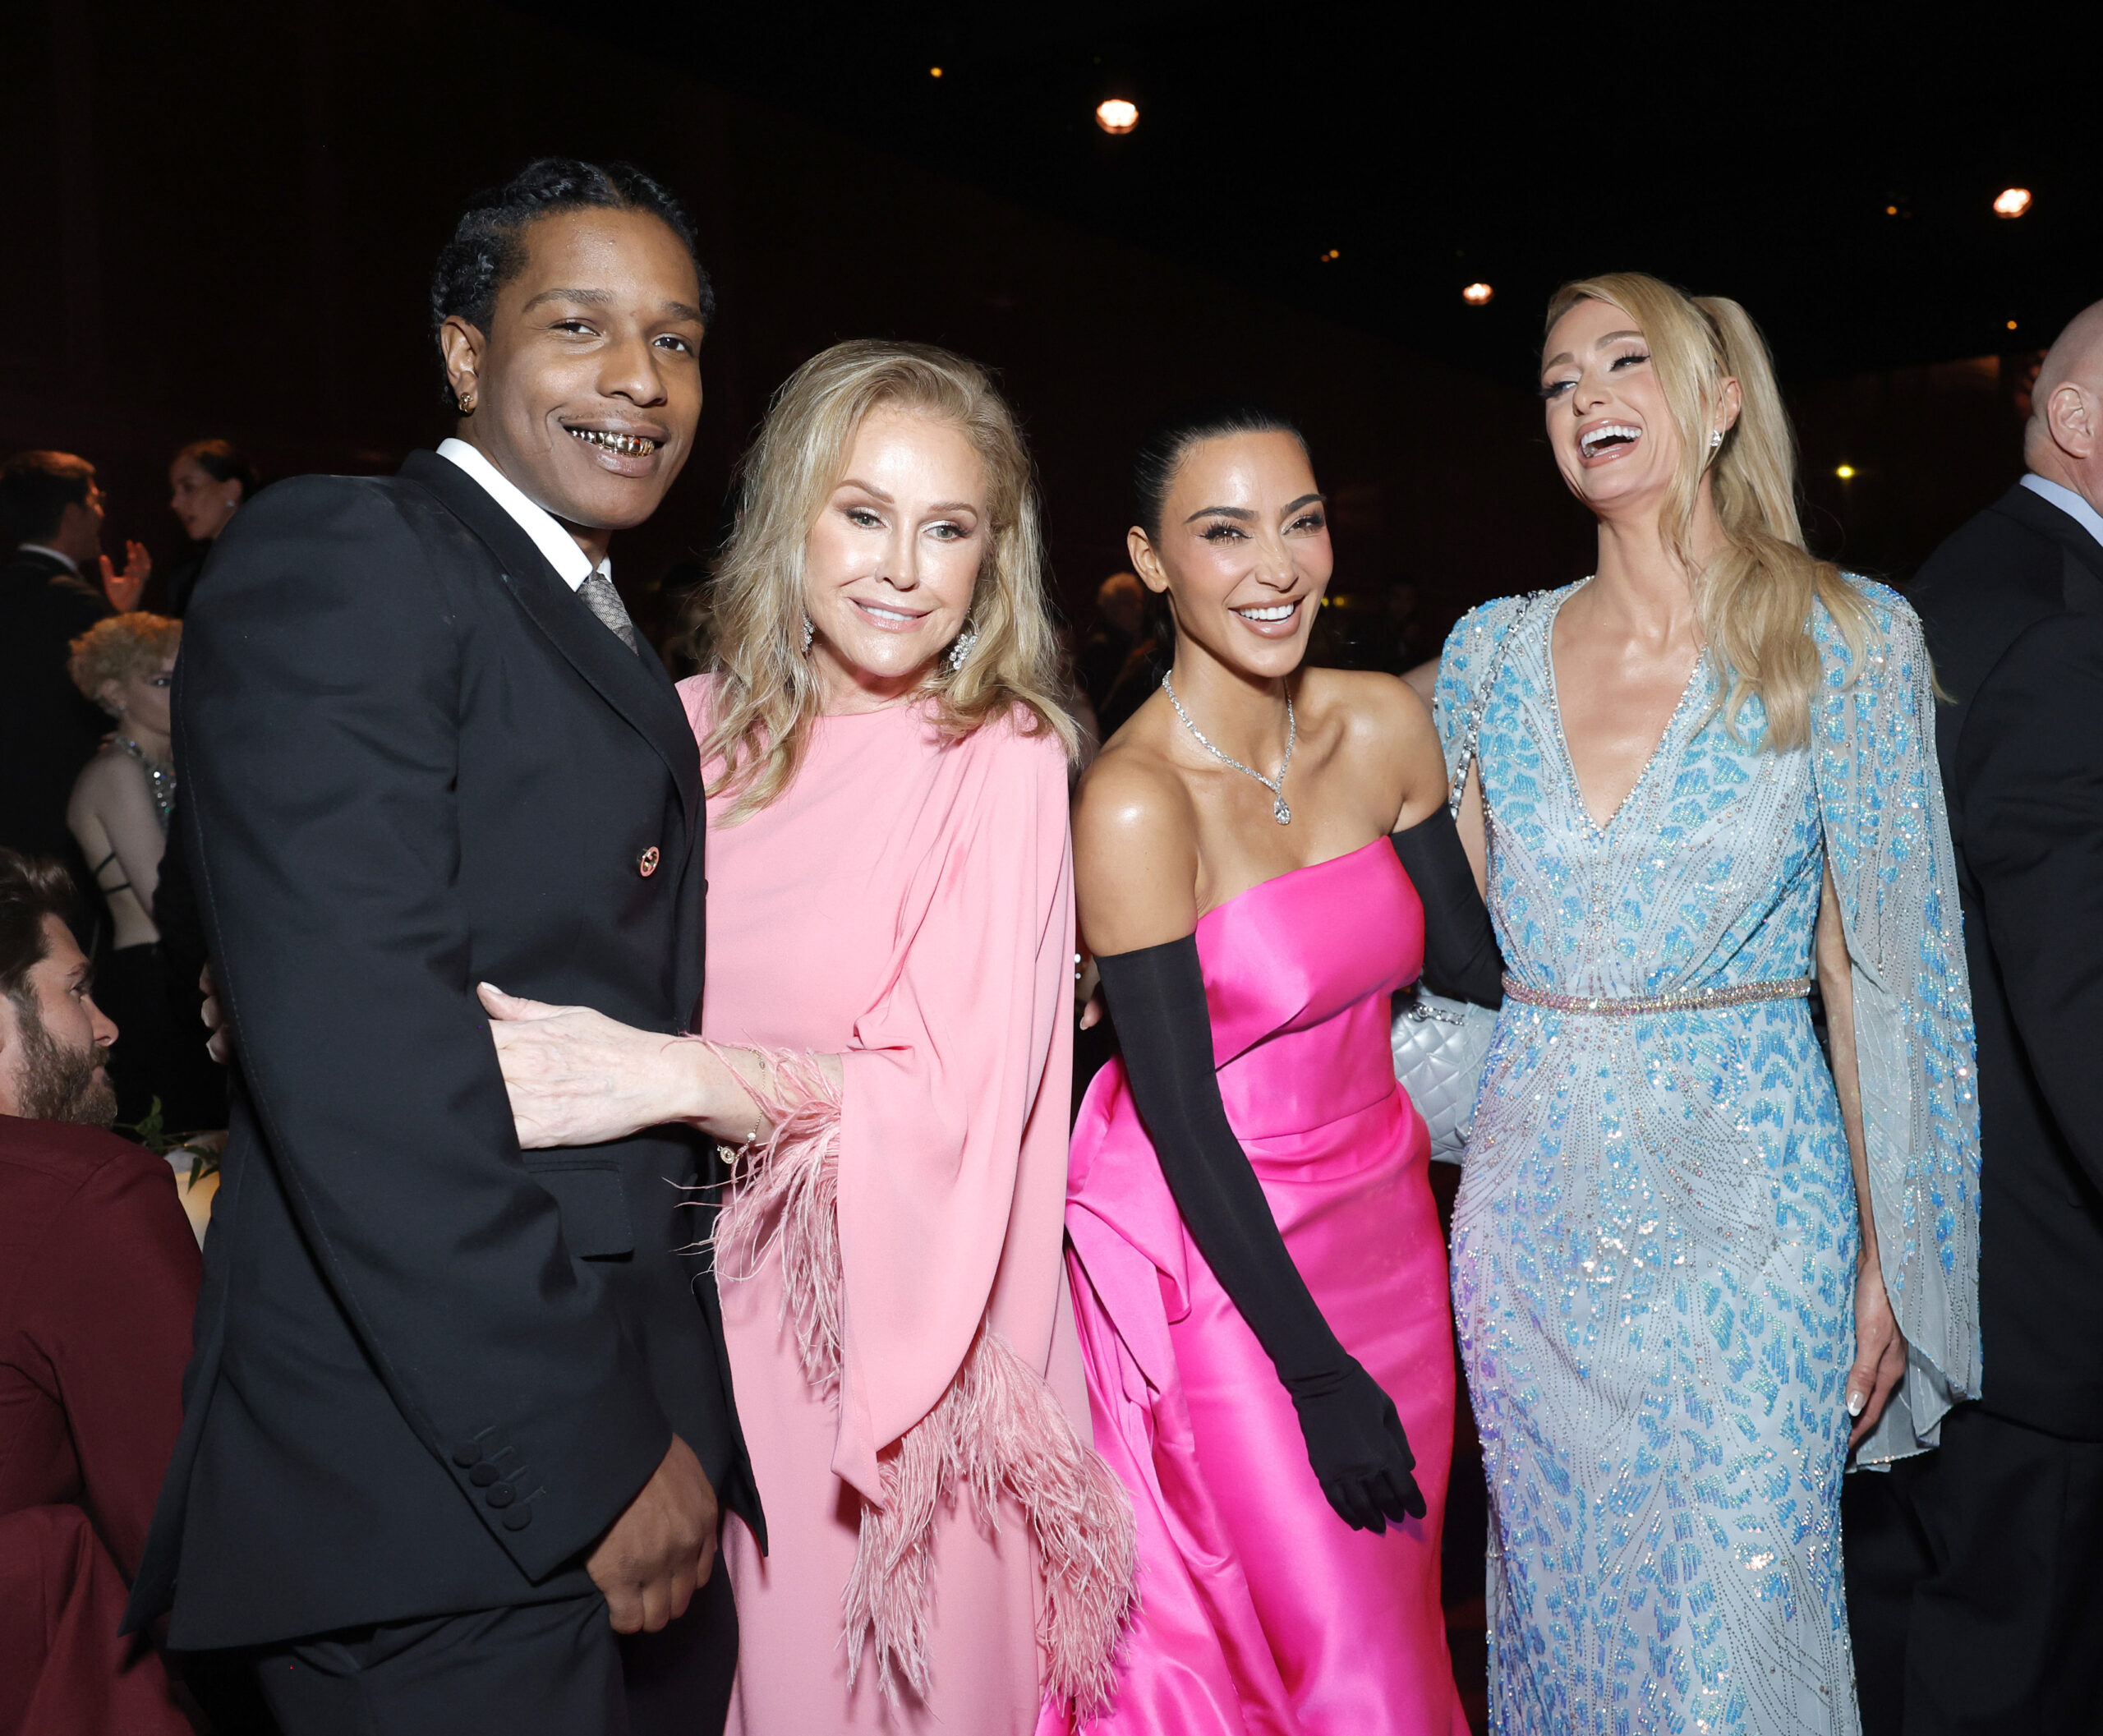 LOS ANGELES, CALIFORNIA - NOVEMBER 04: A$AP Rocky, donning an exquisite Gucci ensemble, alongside the Hilton dynasty's Kathy and Paris Hilton, with the illustrious Kim Kardashian, grace the 2023 LACMA Art+Film Gala, elegantly presented by Gucci at the Los Angeles County Museum of Art on November 04, 2023, in Los Angeles, California. (Photo courtesy of Stefanie Keenan/Getty Images for LACMA)
